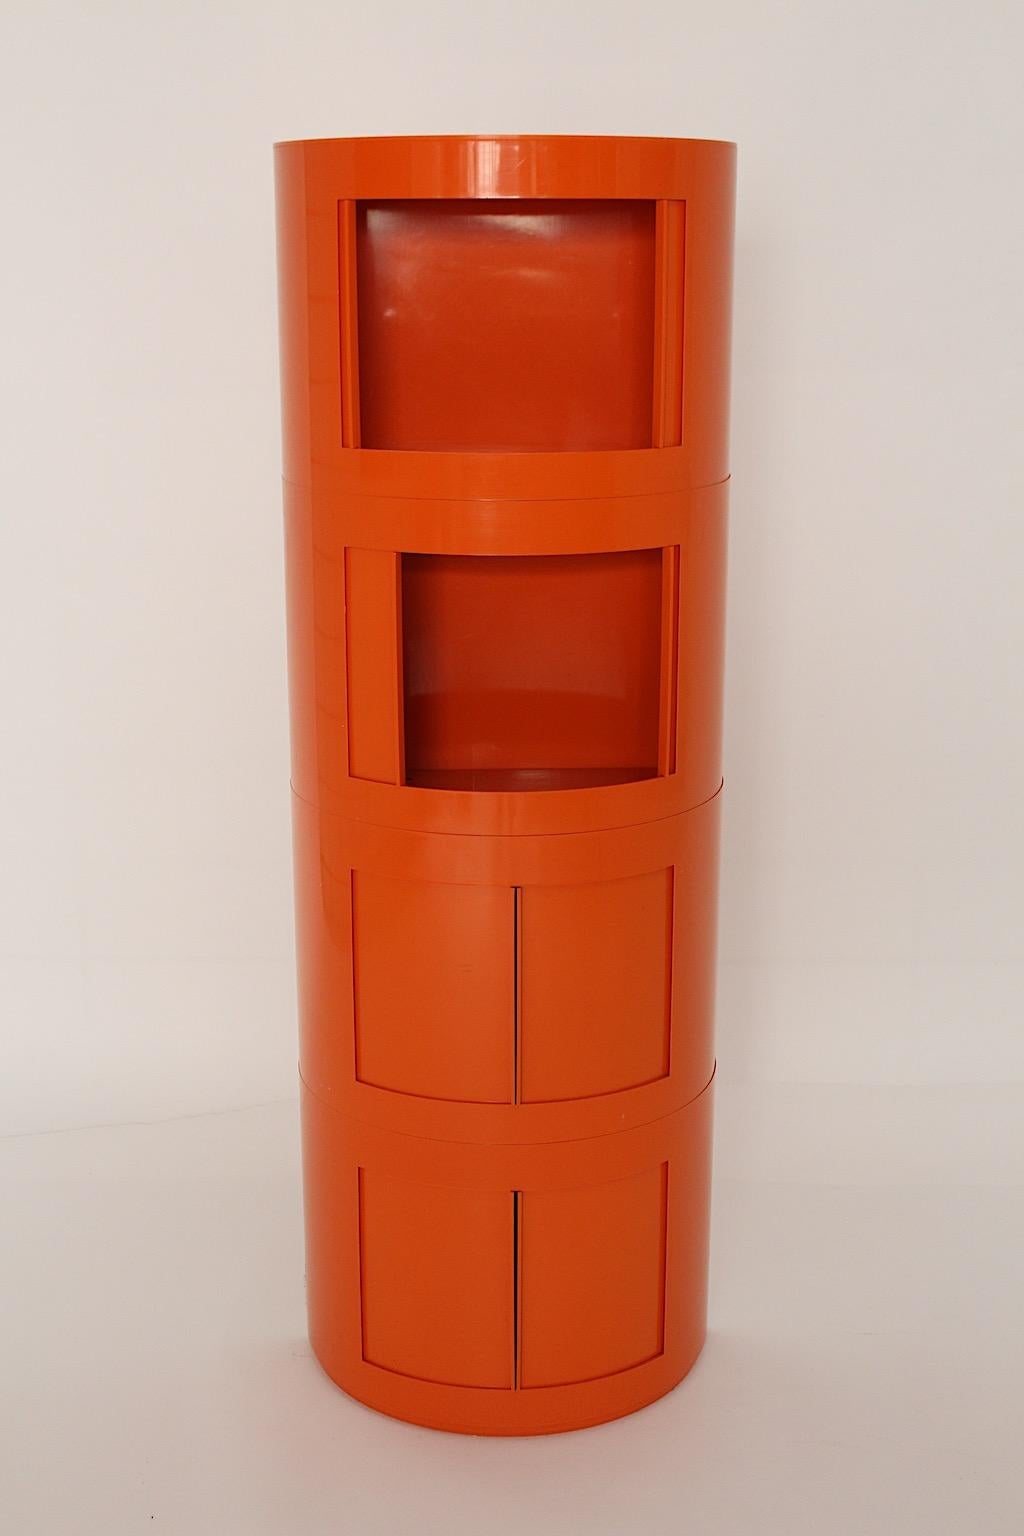 Soace Age vintage orange commodes or chest of drawers Storage container from plastic Depositato Model Packo designed by Giorgina Castiglioni for the company Bilumen, 1960s, Italy.
It shows stackable parts and sliding doors, which create a beautiful